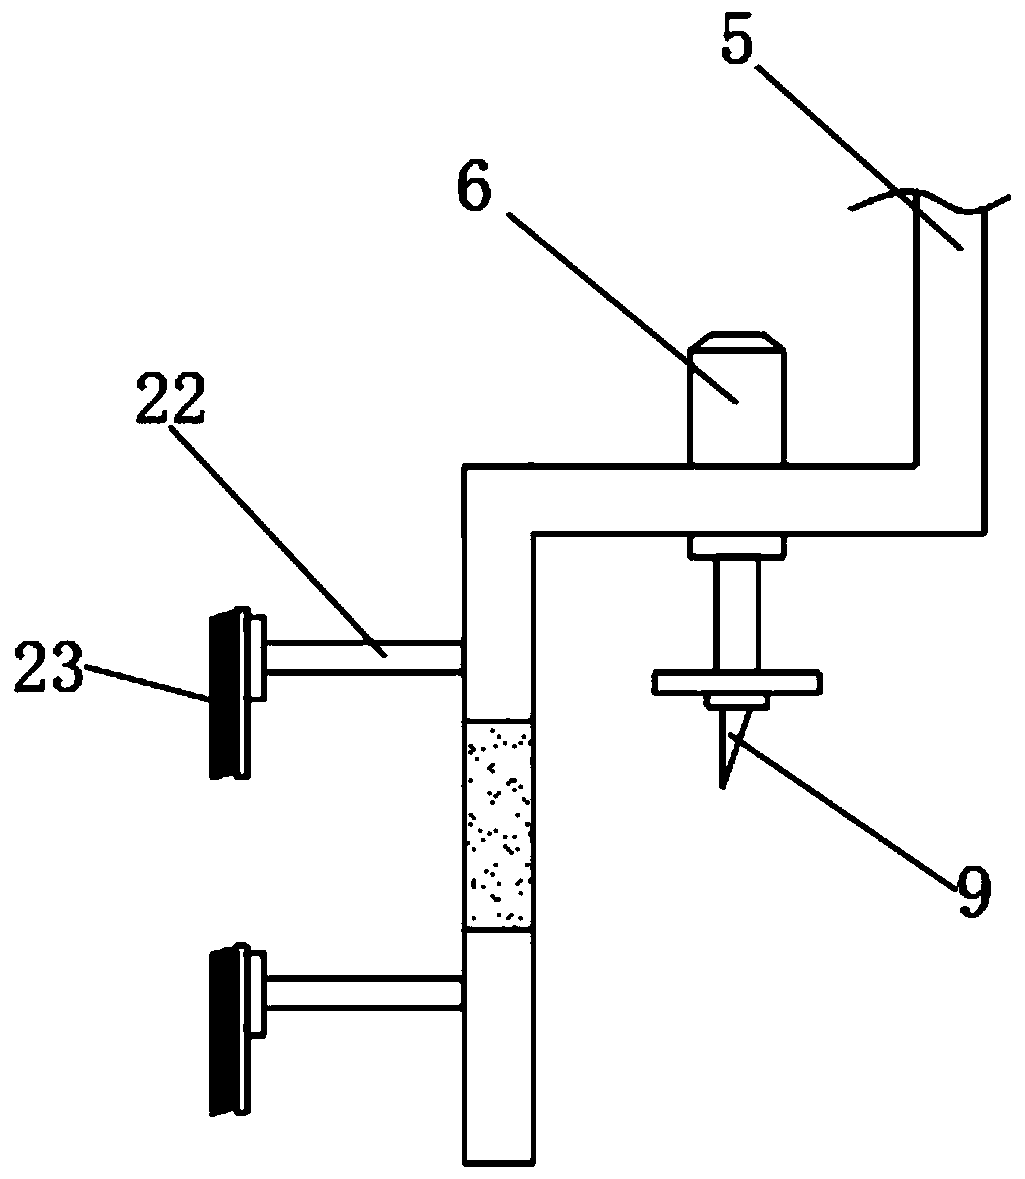 Sugarcane peeling device for agricultural production